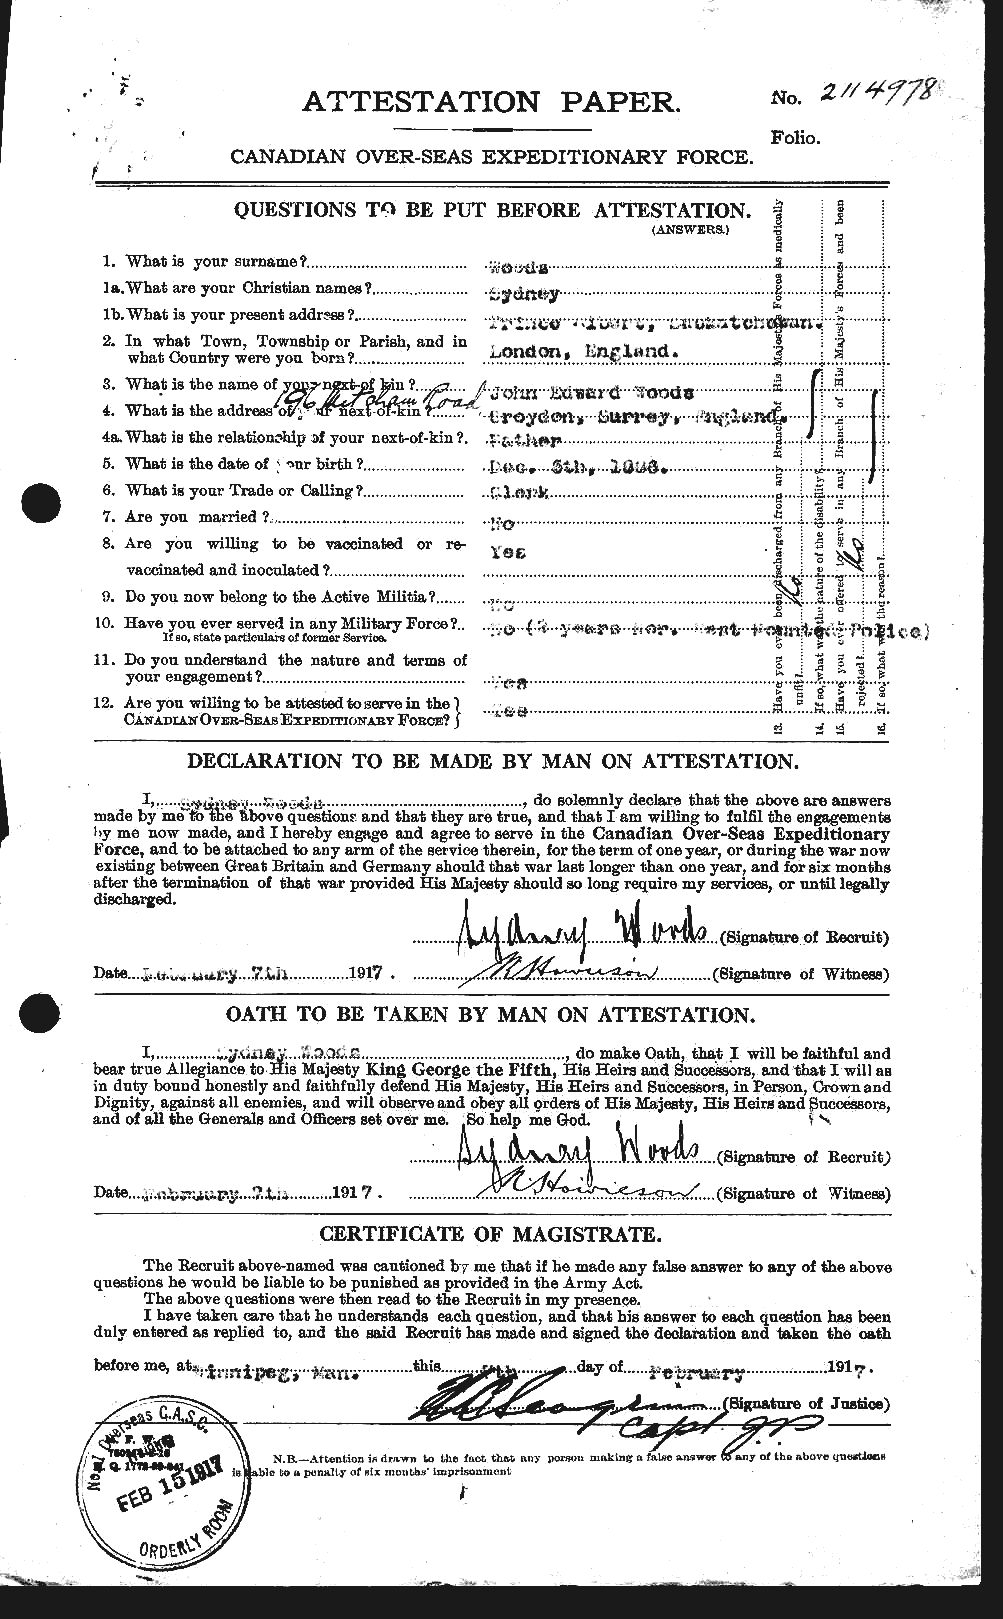 Personnel Records of the First World War - CEF 683473a